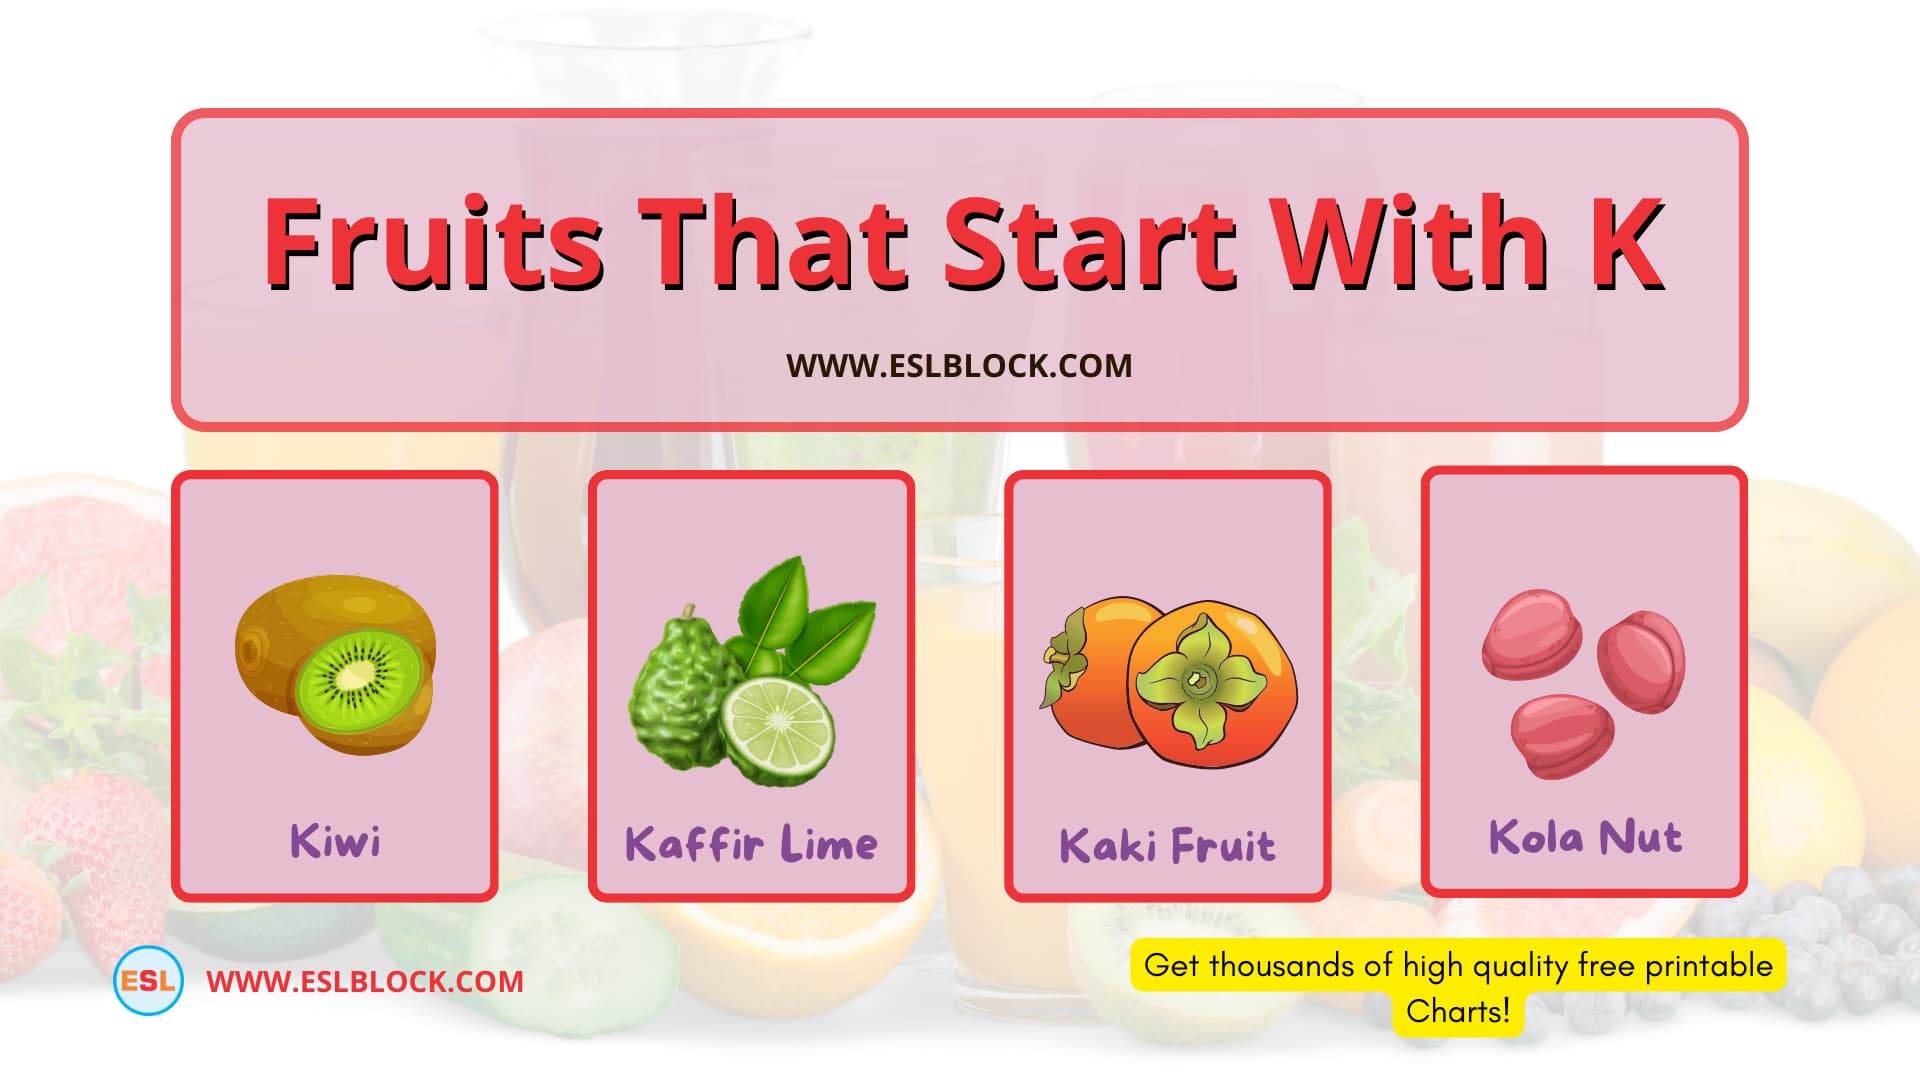 List of Fruits That Start With K